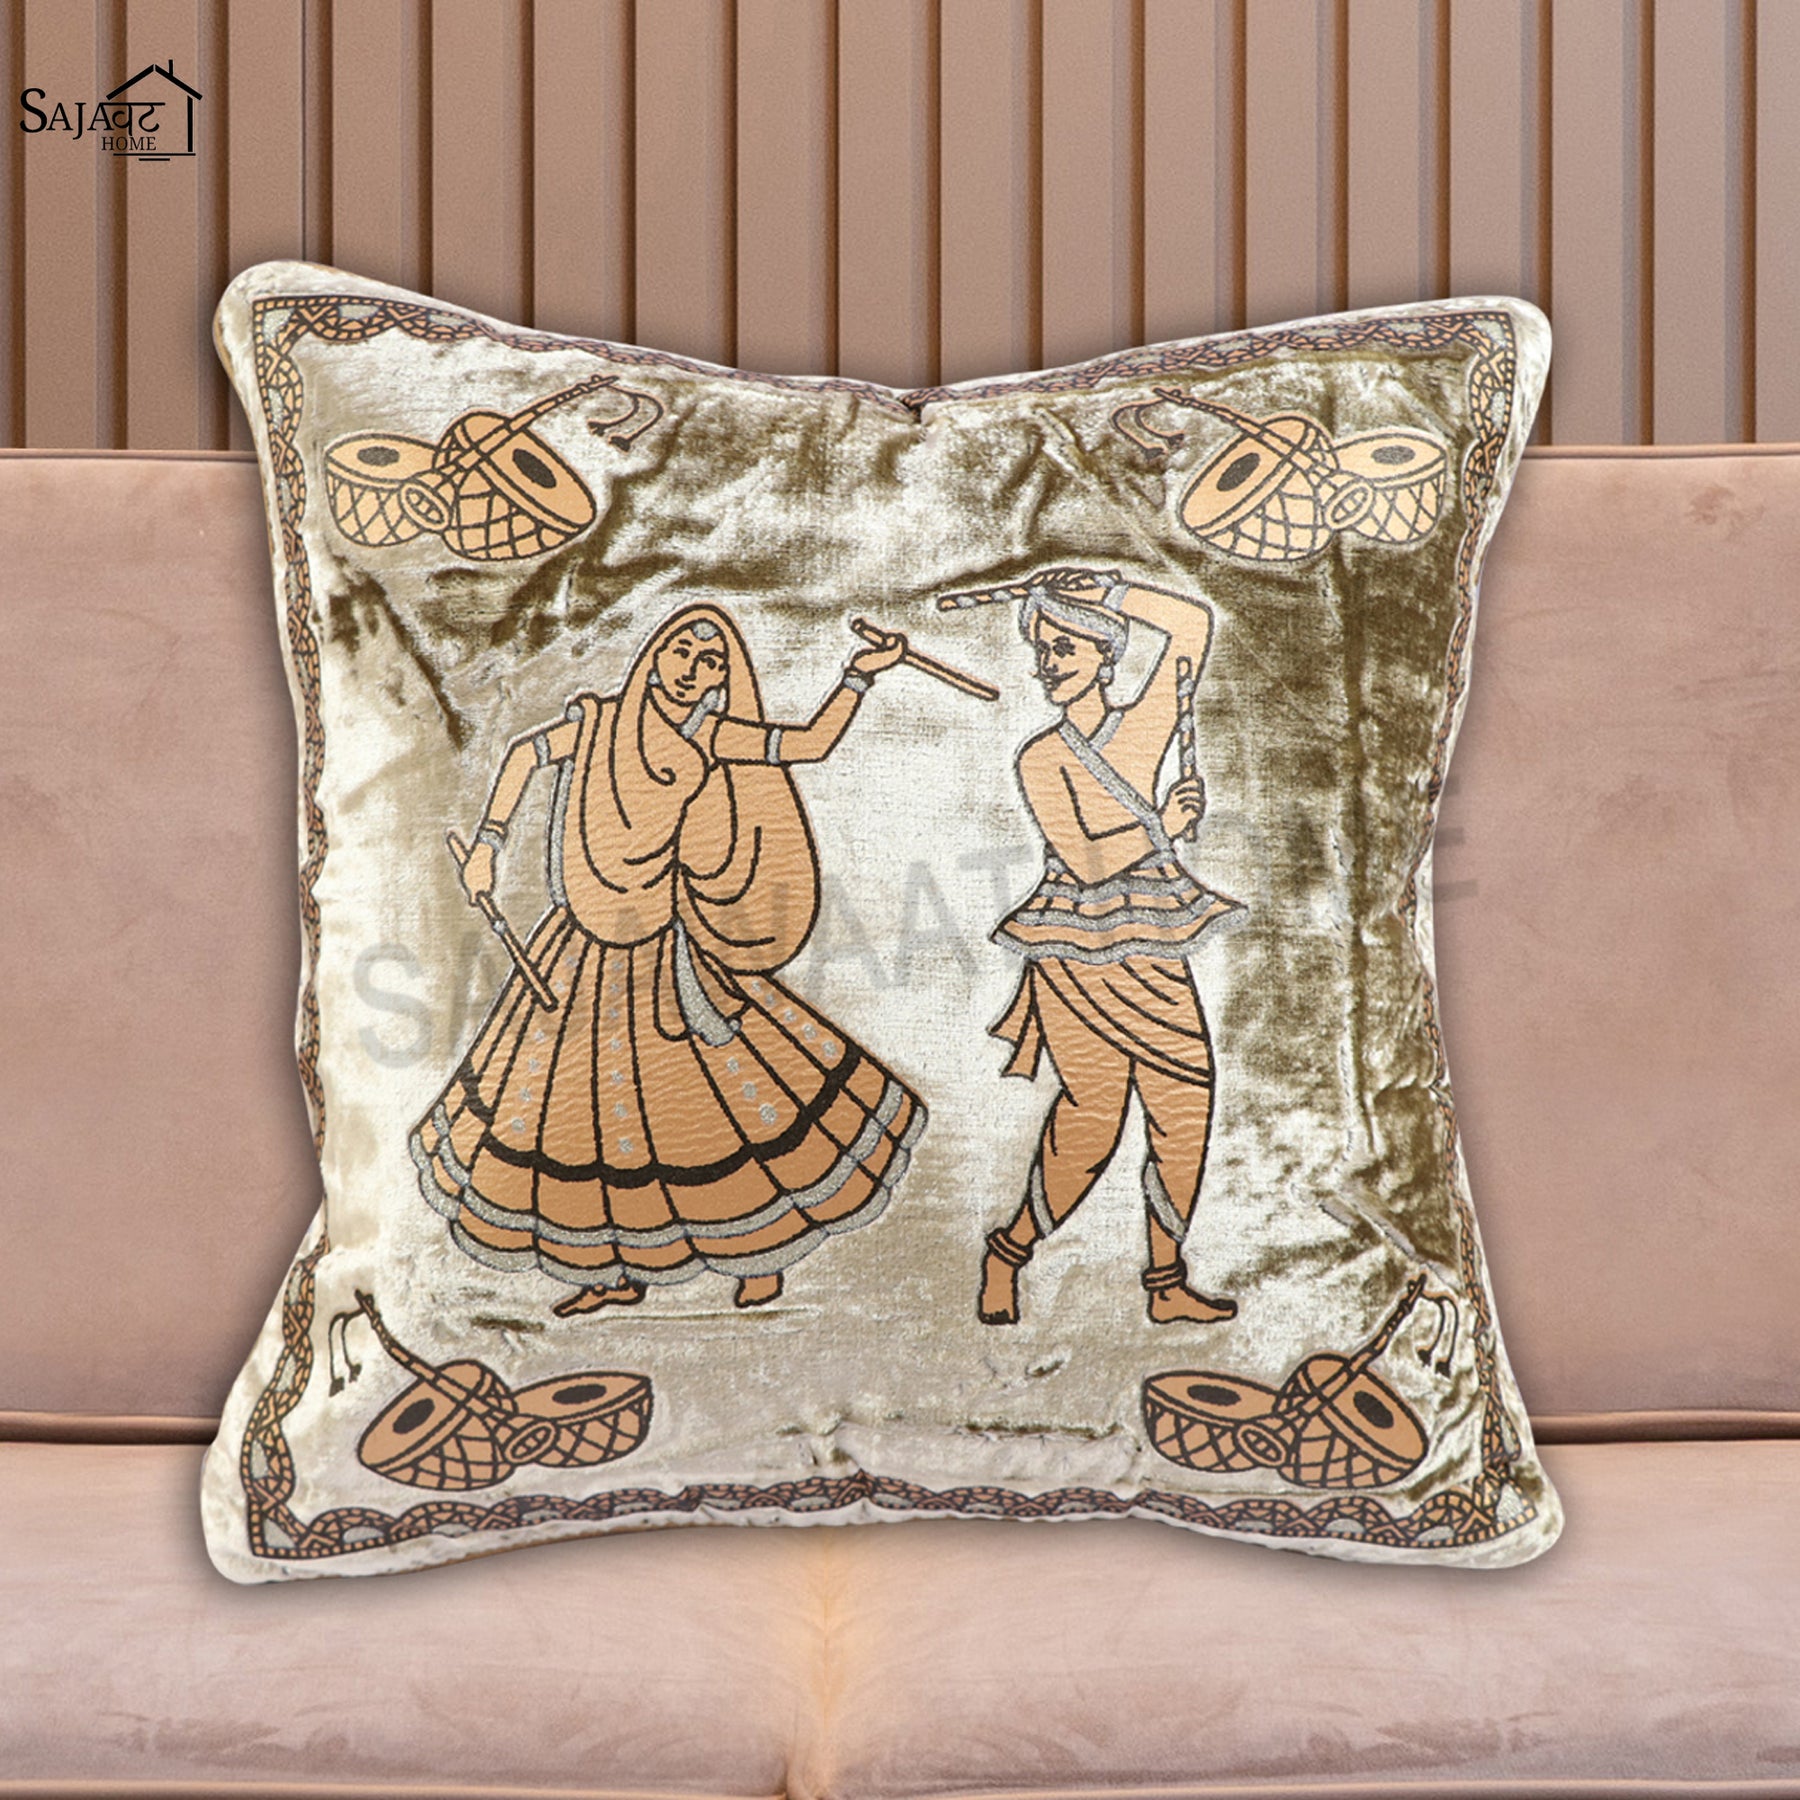 Buy Boho Savannah Cushion Cover Online in India at Best Price